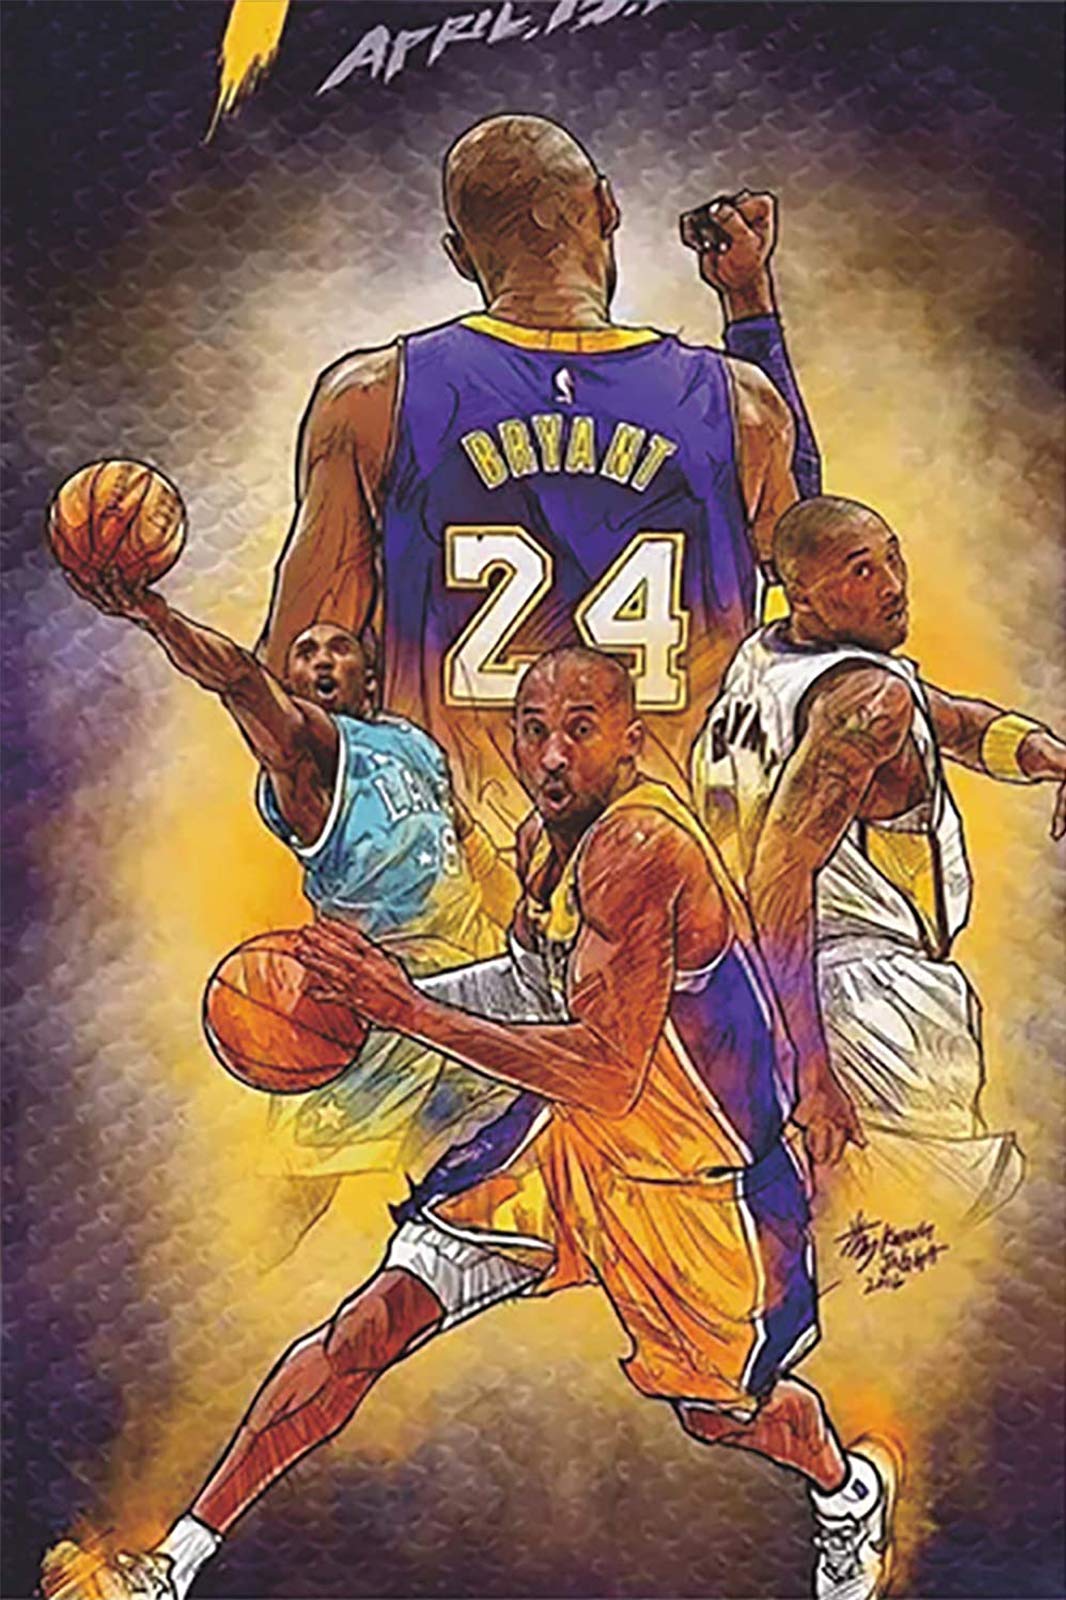 Life kobe bryant poster basketball player canvas wall art print poster pictures for boys room bedroom home decor unframed xinchxcm posters prints